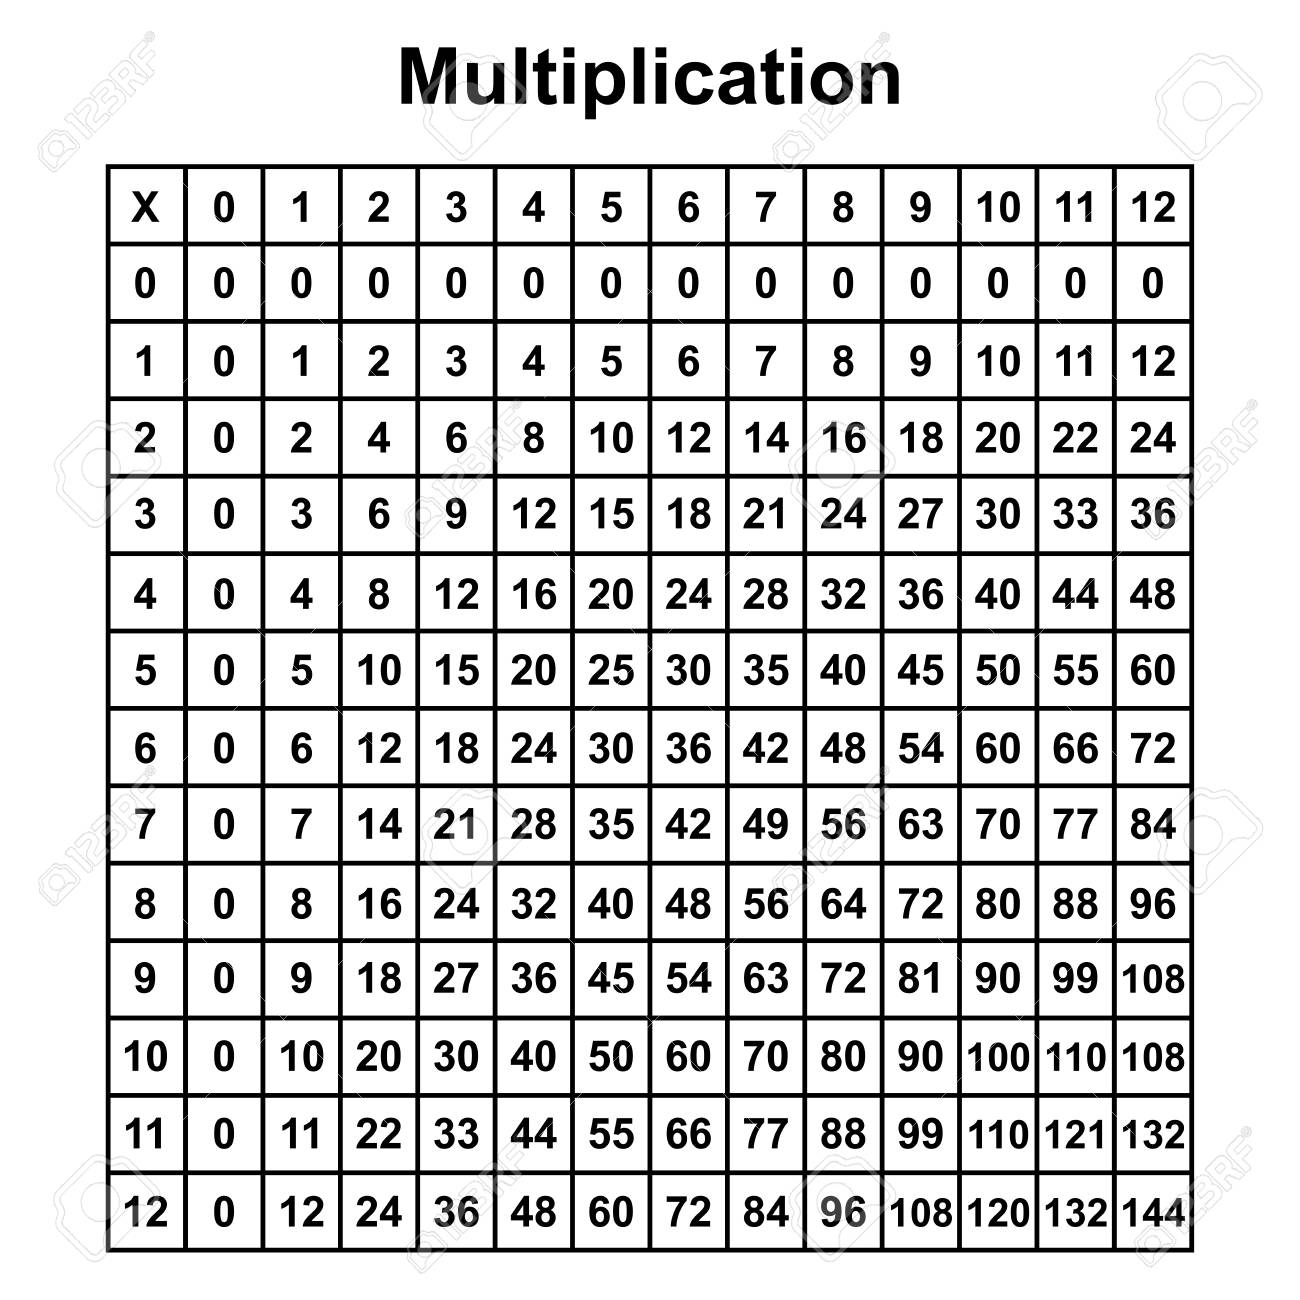 Multiplication Table Chart Or Multiplication Table Printable.. regarding Printable Multiplication Tables Chart